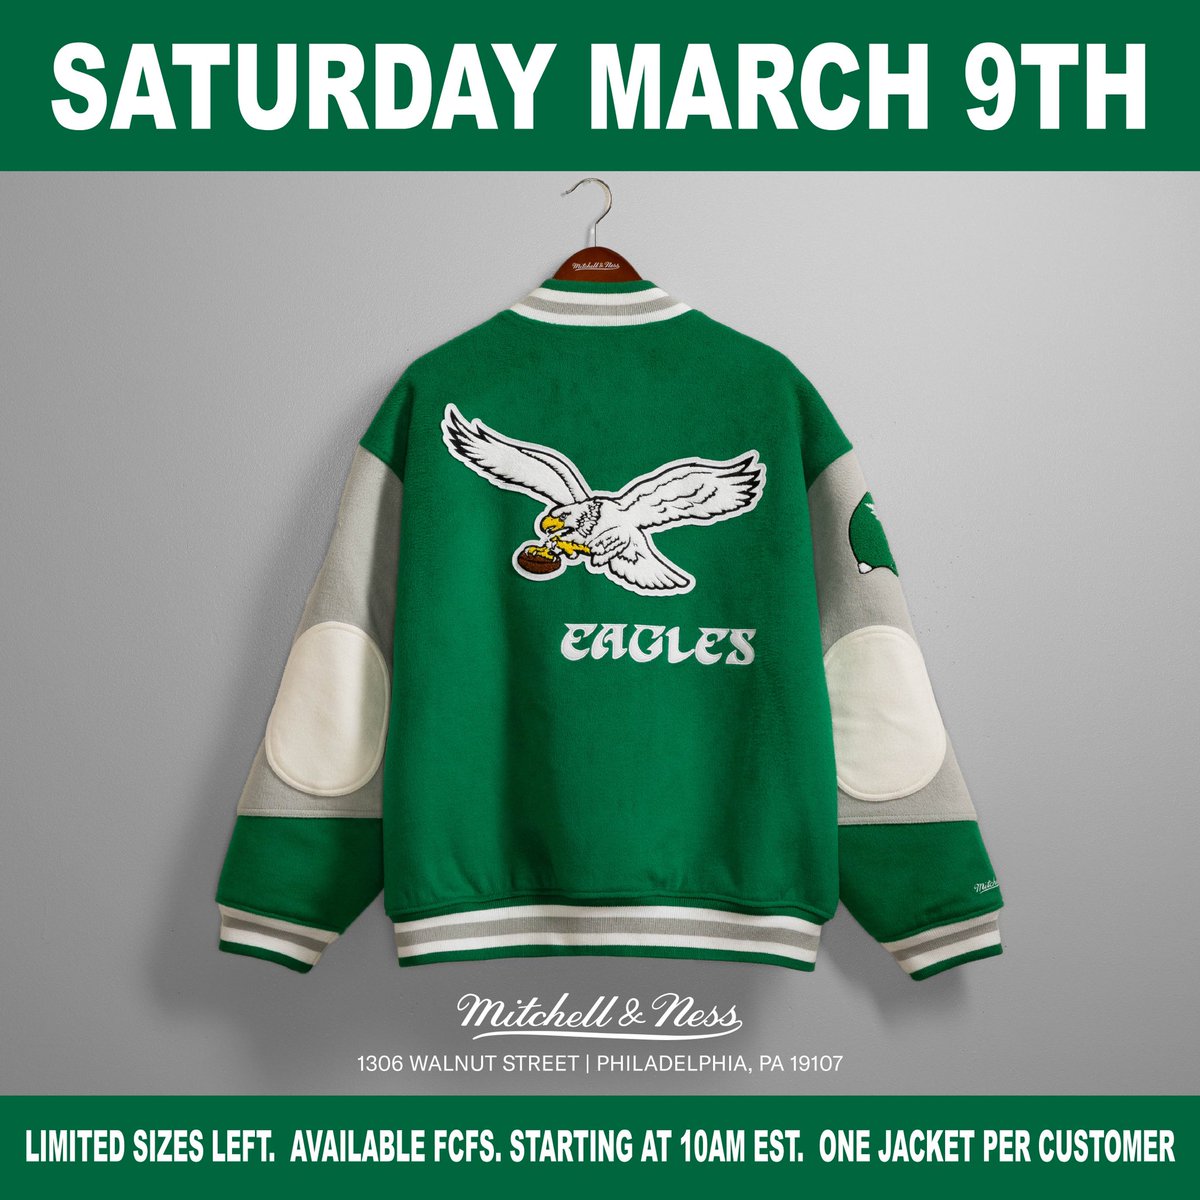 Last chance for Royalty 👑💚🦅 LIMITED quantities of the Eagles Varsity Jacket will be available at The Mitchell & Ness Flagship Store tomorrow at 10AM EST. *FCFS. 1 Jacket limit per customer. Sizes: XS through 4XL. In-Store purchase only. All sales are FINAL.